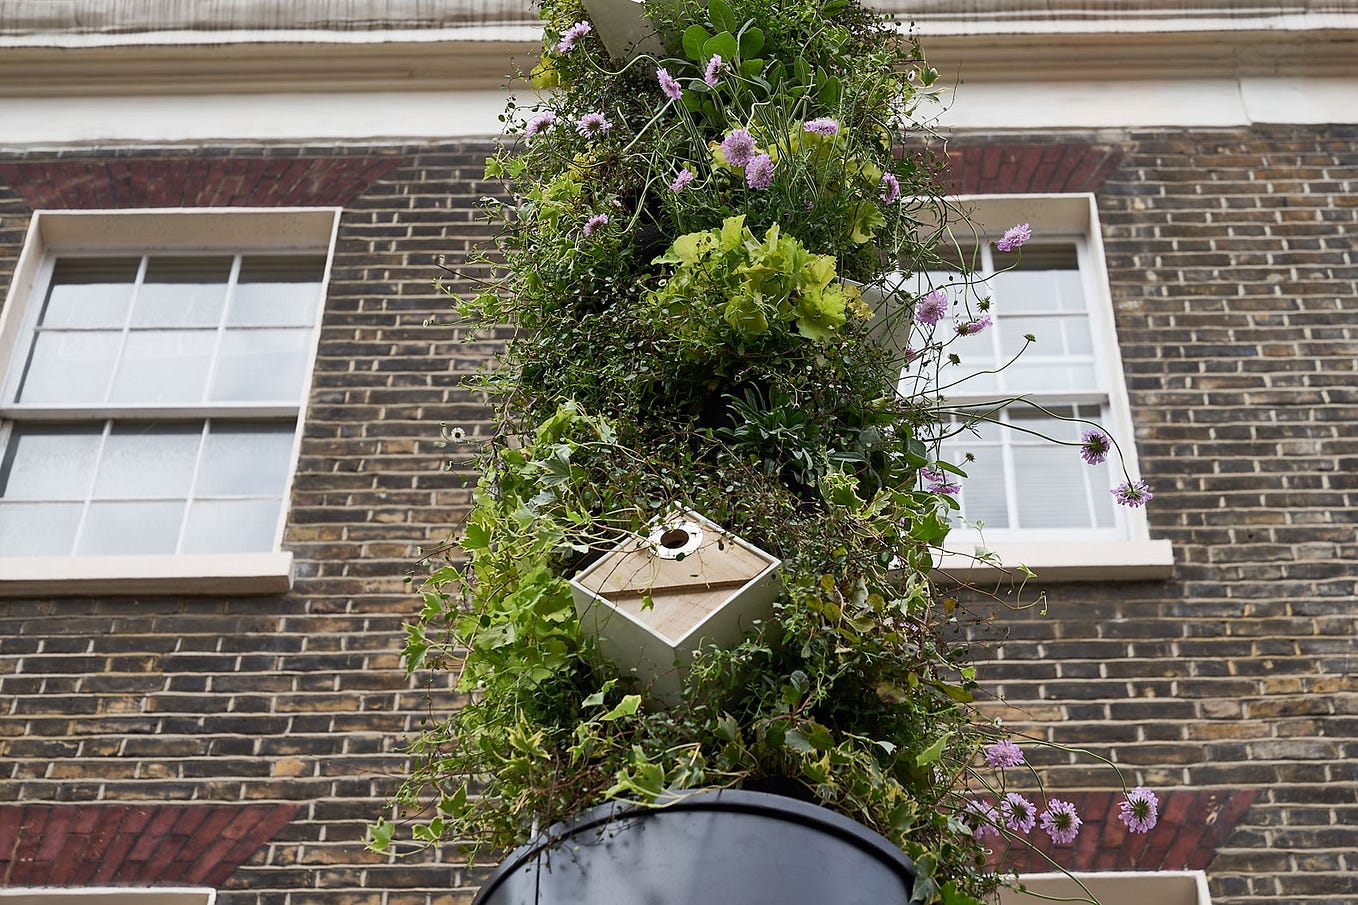 Retrofitted “green” living lamp posts in London reclaim water and run on solar power